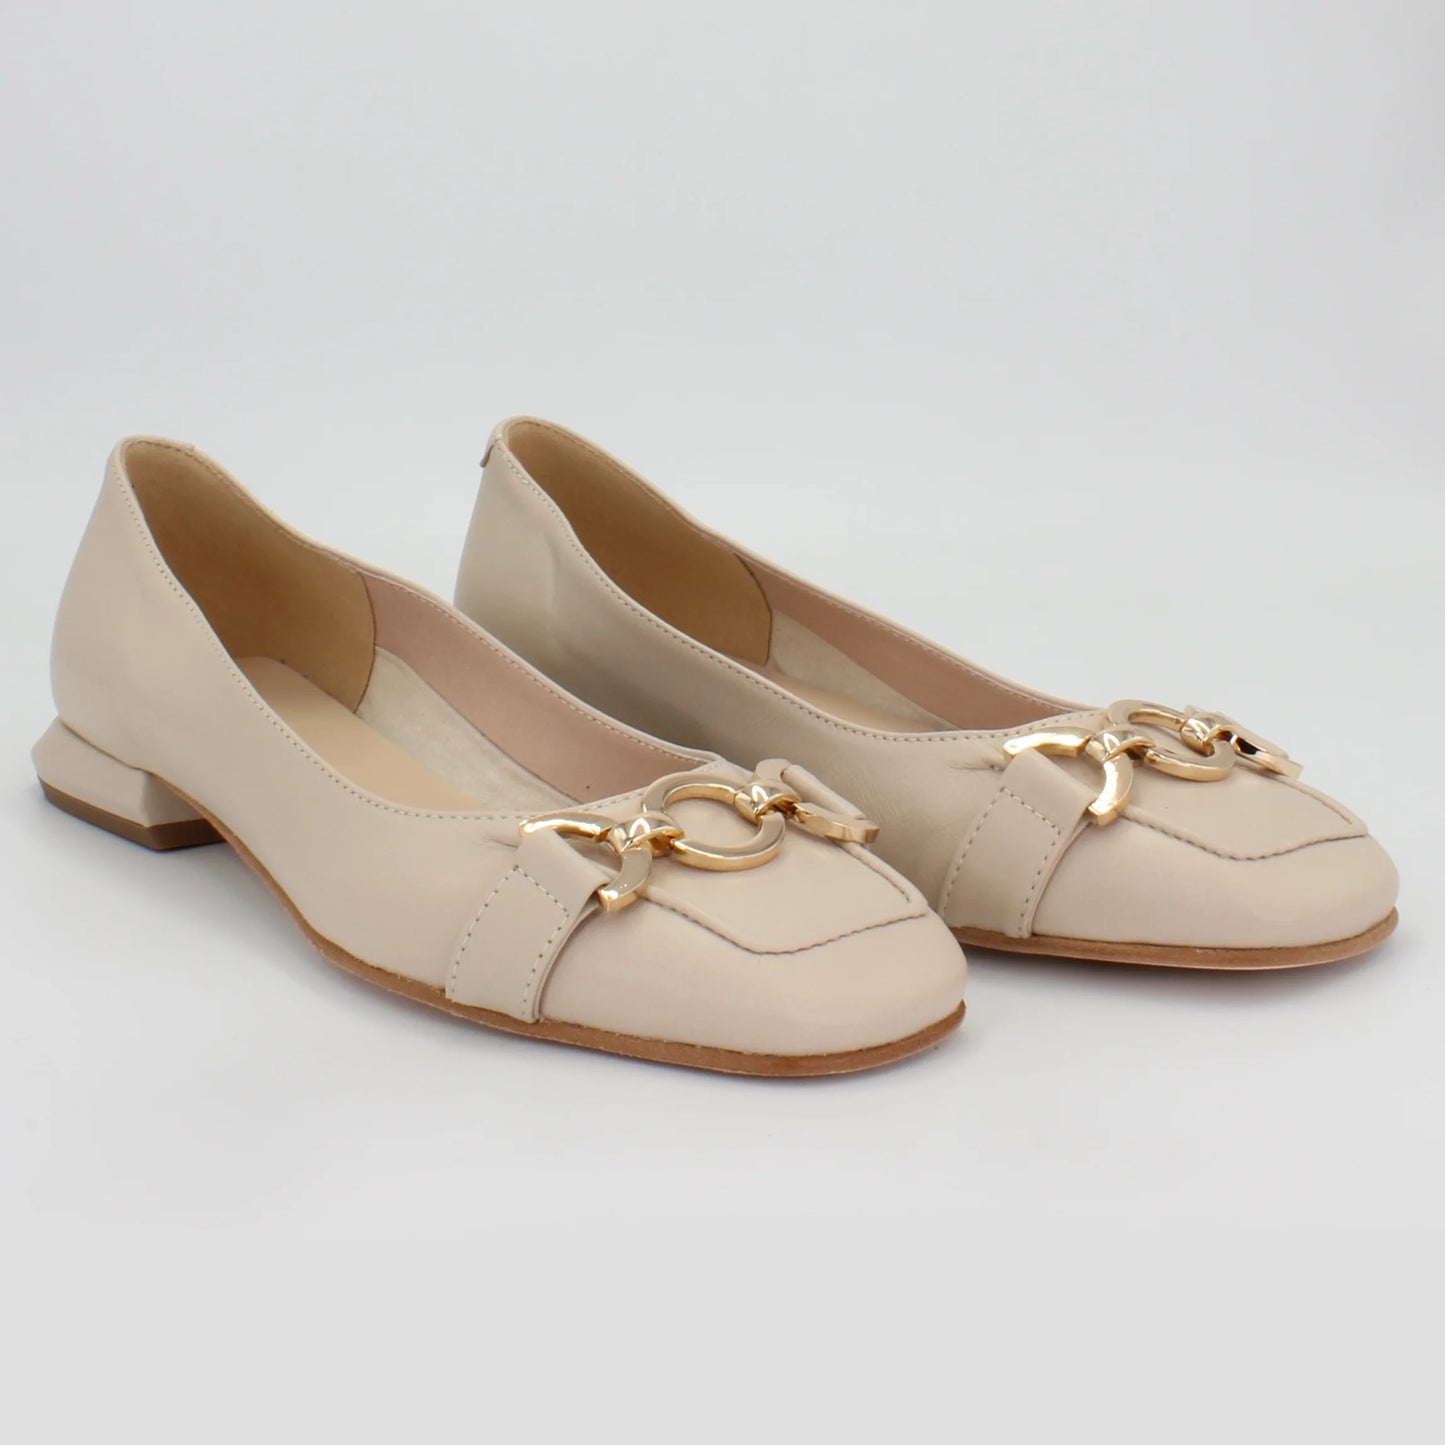 Shop Handmade Italian Leather moccasin in ice cream (P254) or browse our range of hand-made Italian shoes in leather or suede in-store at Aliverti Cape Town, or shop online. We deliver in South Africa & offer multiple payment plans as well as accept multiple safe & secure payment methods.